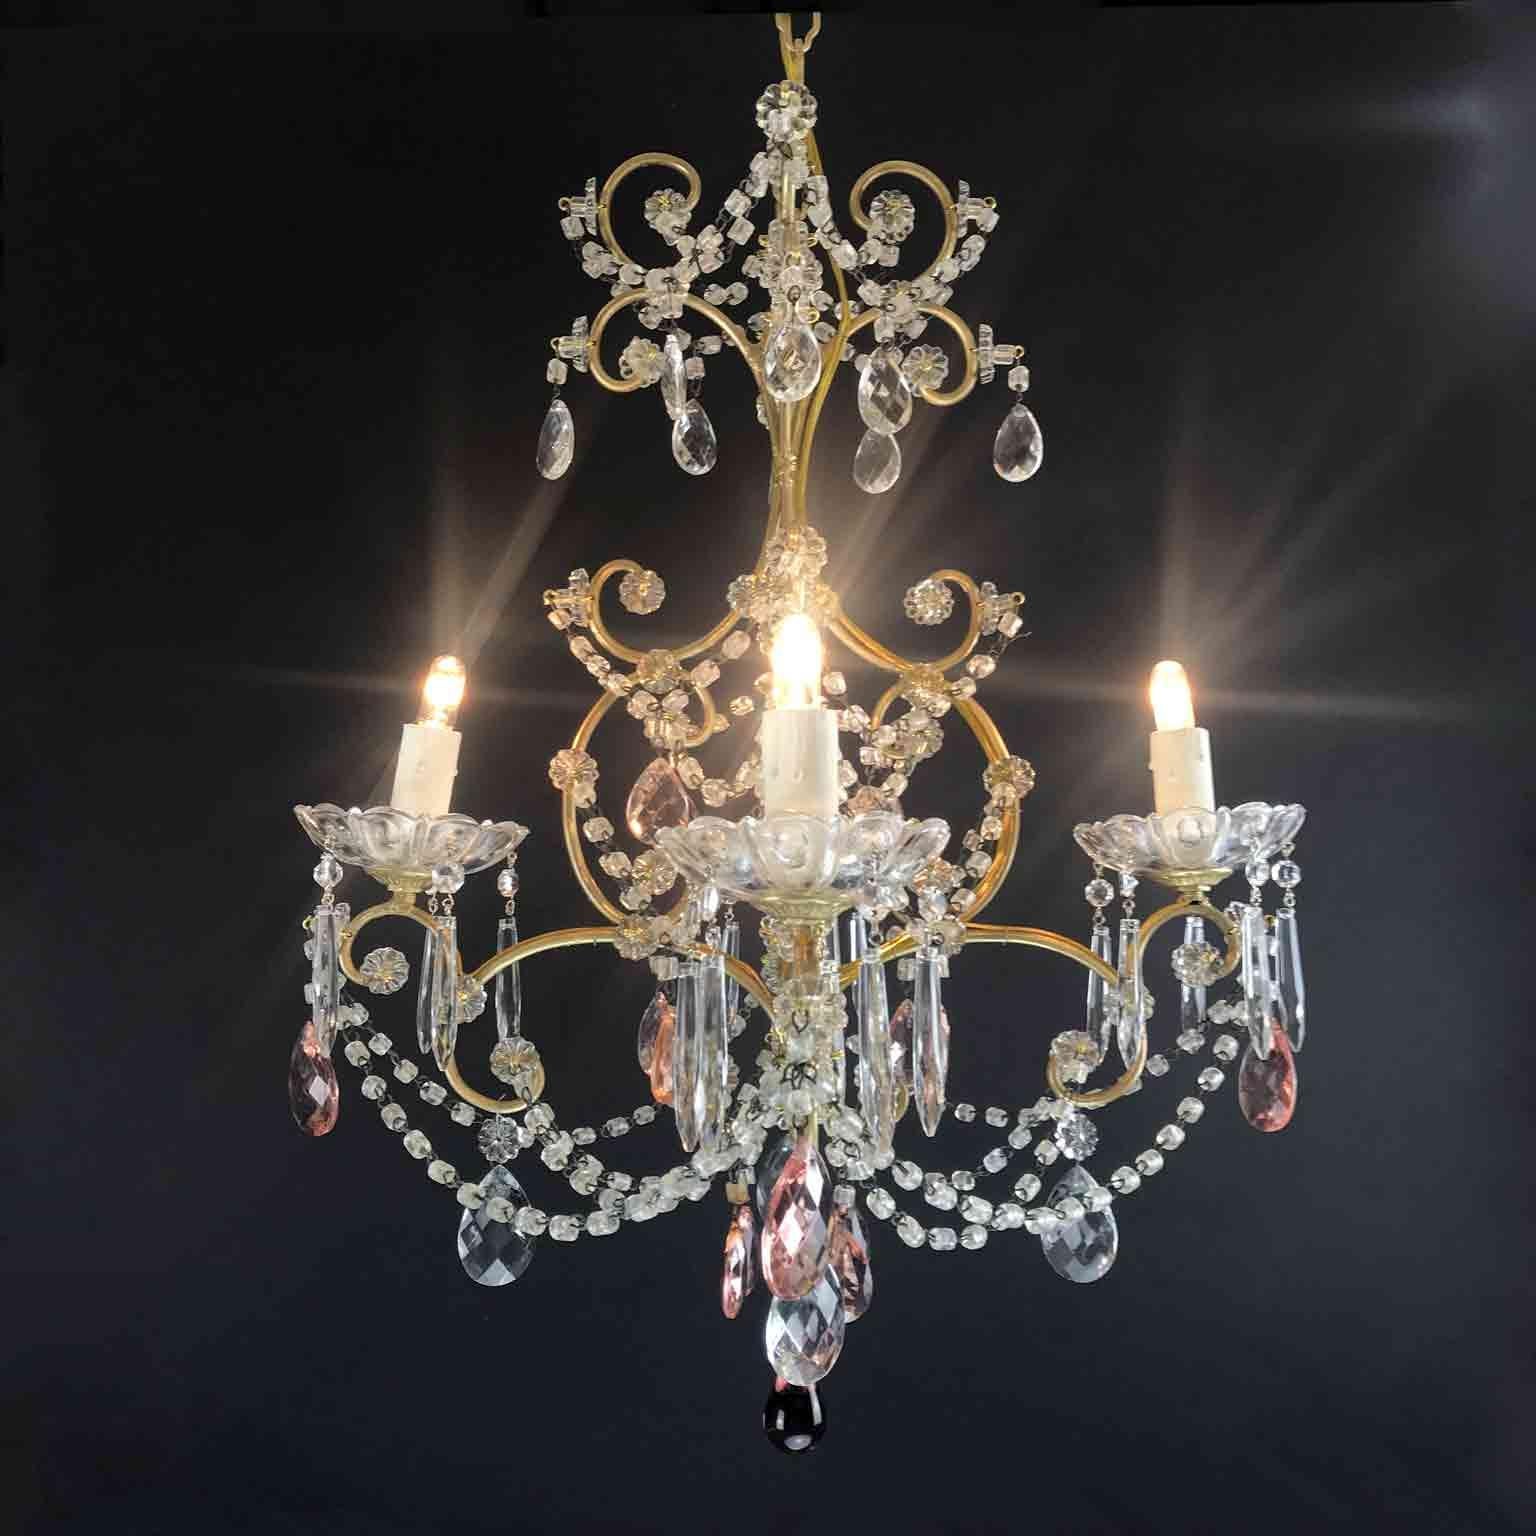 From Italy, a small romantic four-armed chandelier with a gilded brass cage shaped scrolling frame with four Edison 14 lights, fully decorated with clear crystal beaded swags, warm rose color crystal drops and beaded crystal chains.
Very good